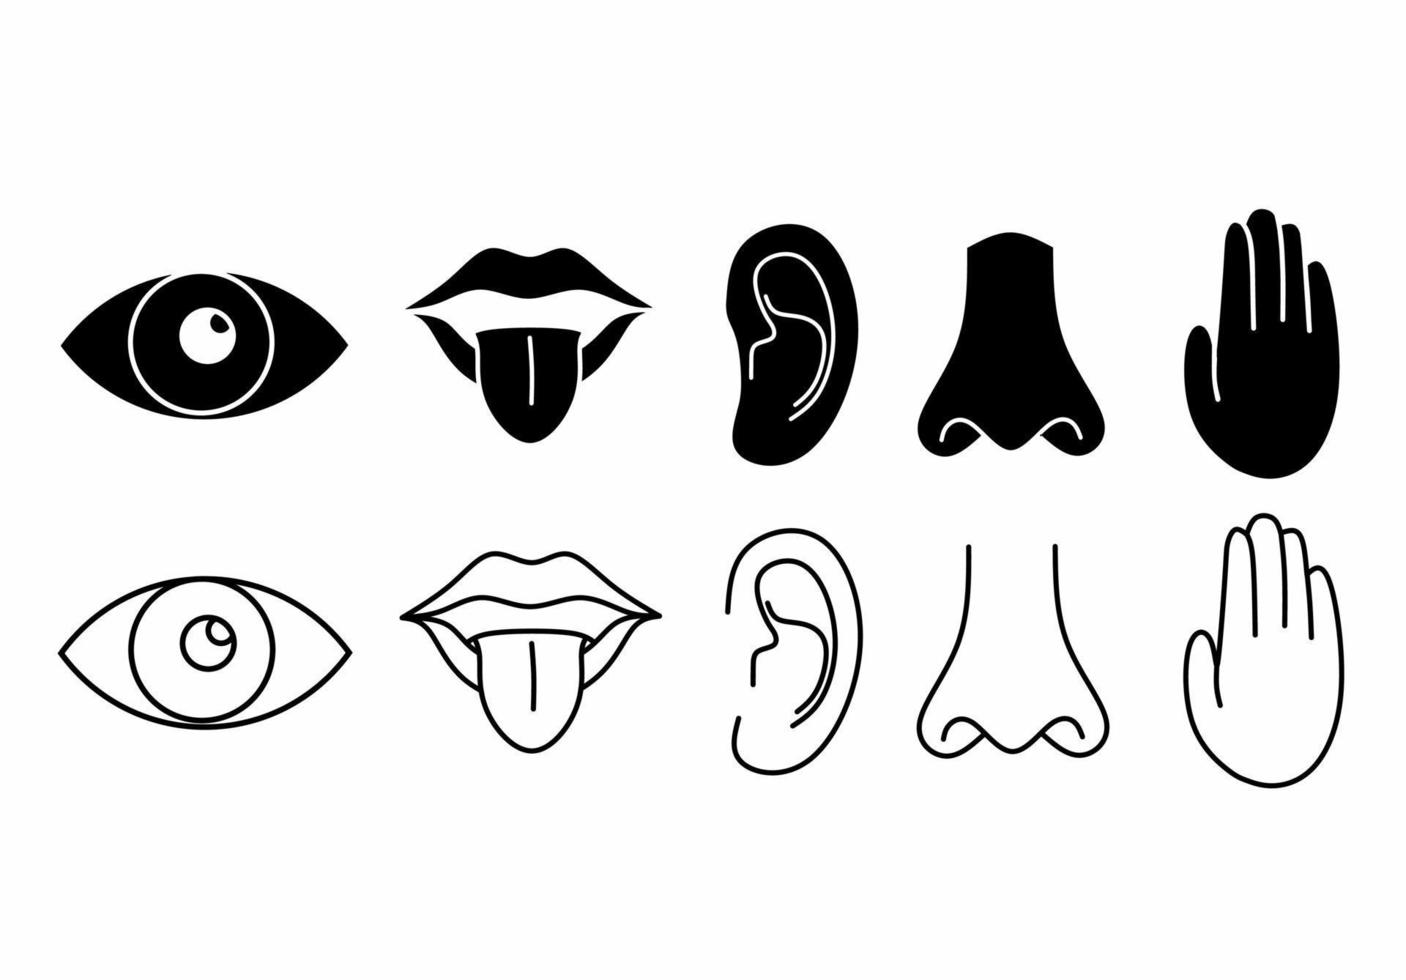 Five human senses icons set isolated on white background vector